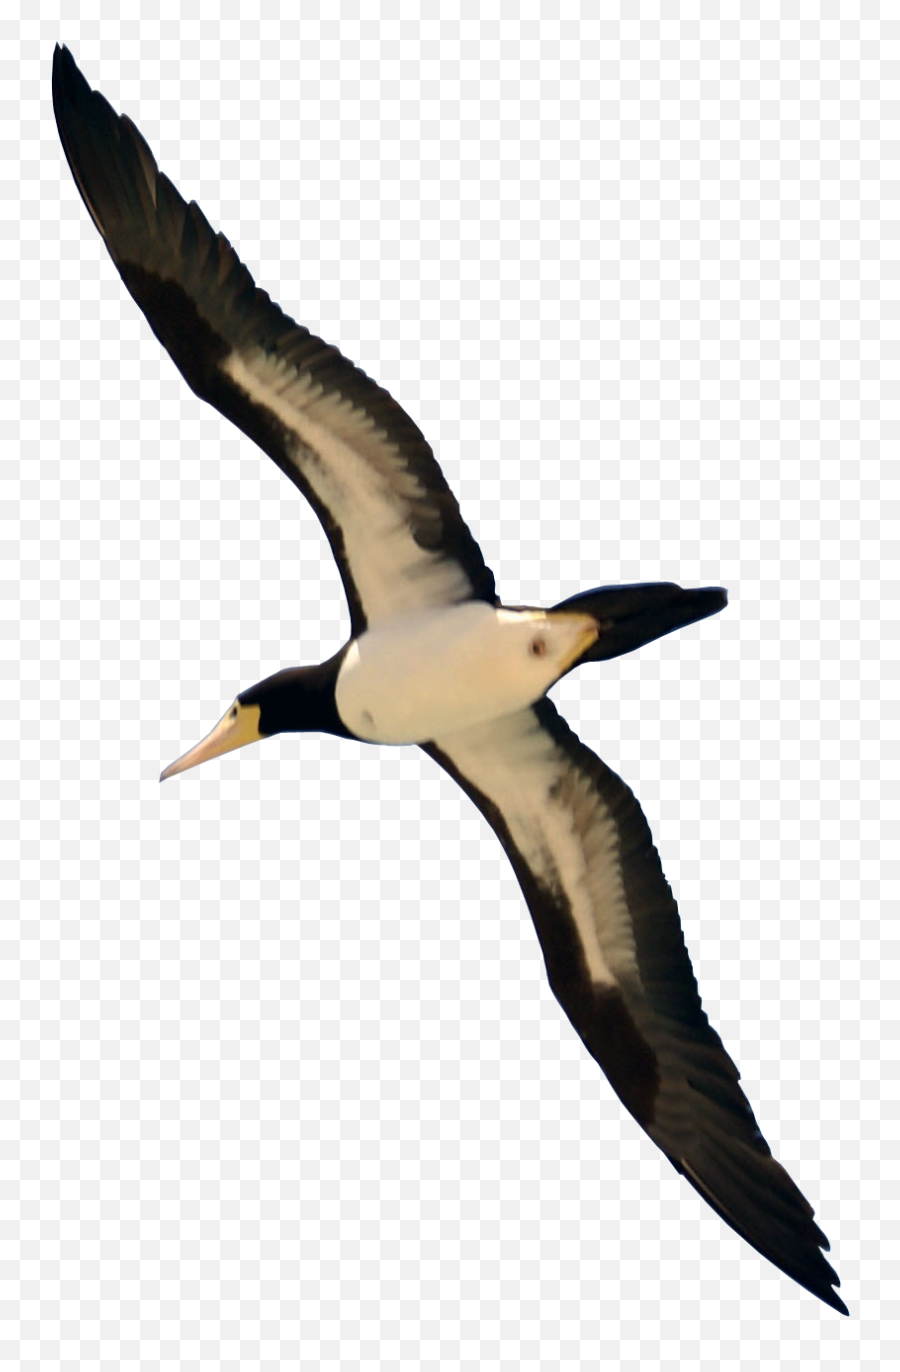 Download Bird Flying Png Image For Free - Real Bird Flying Png,Birds Png